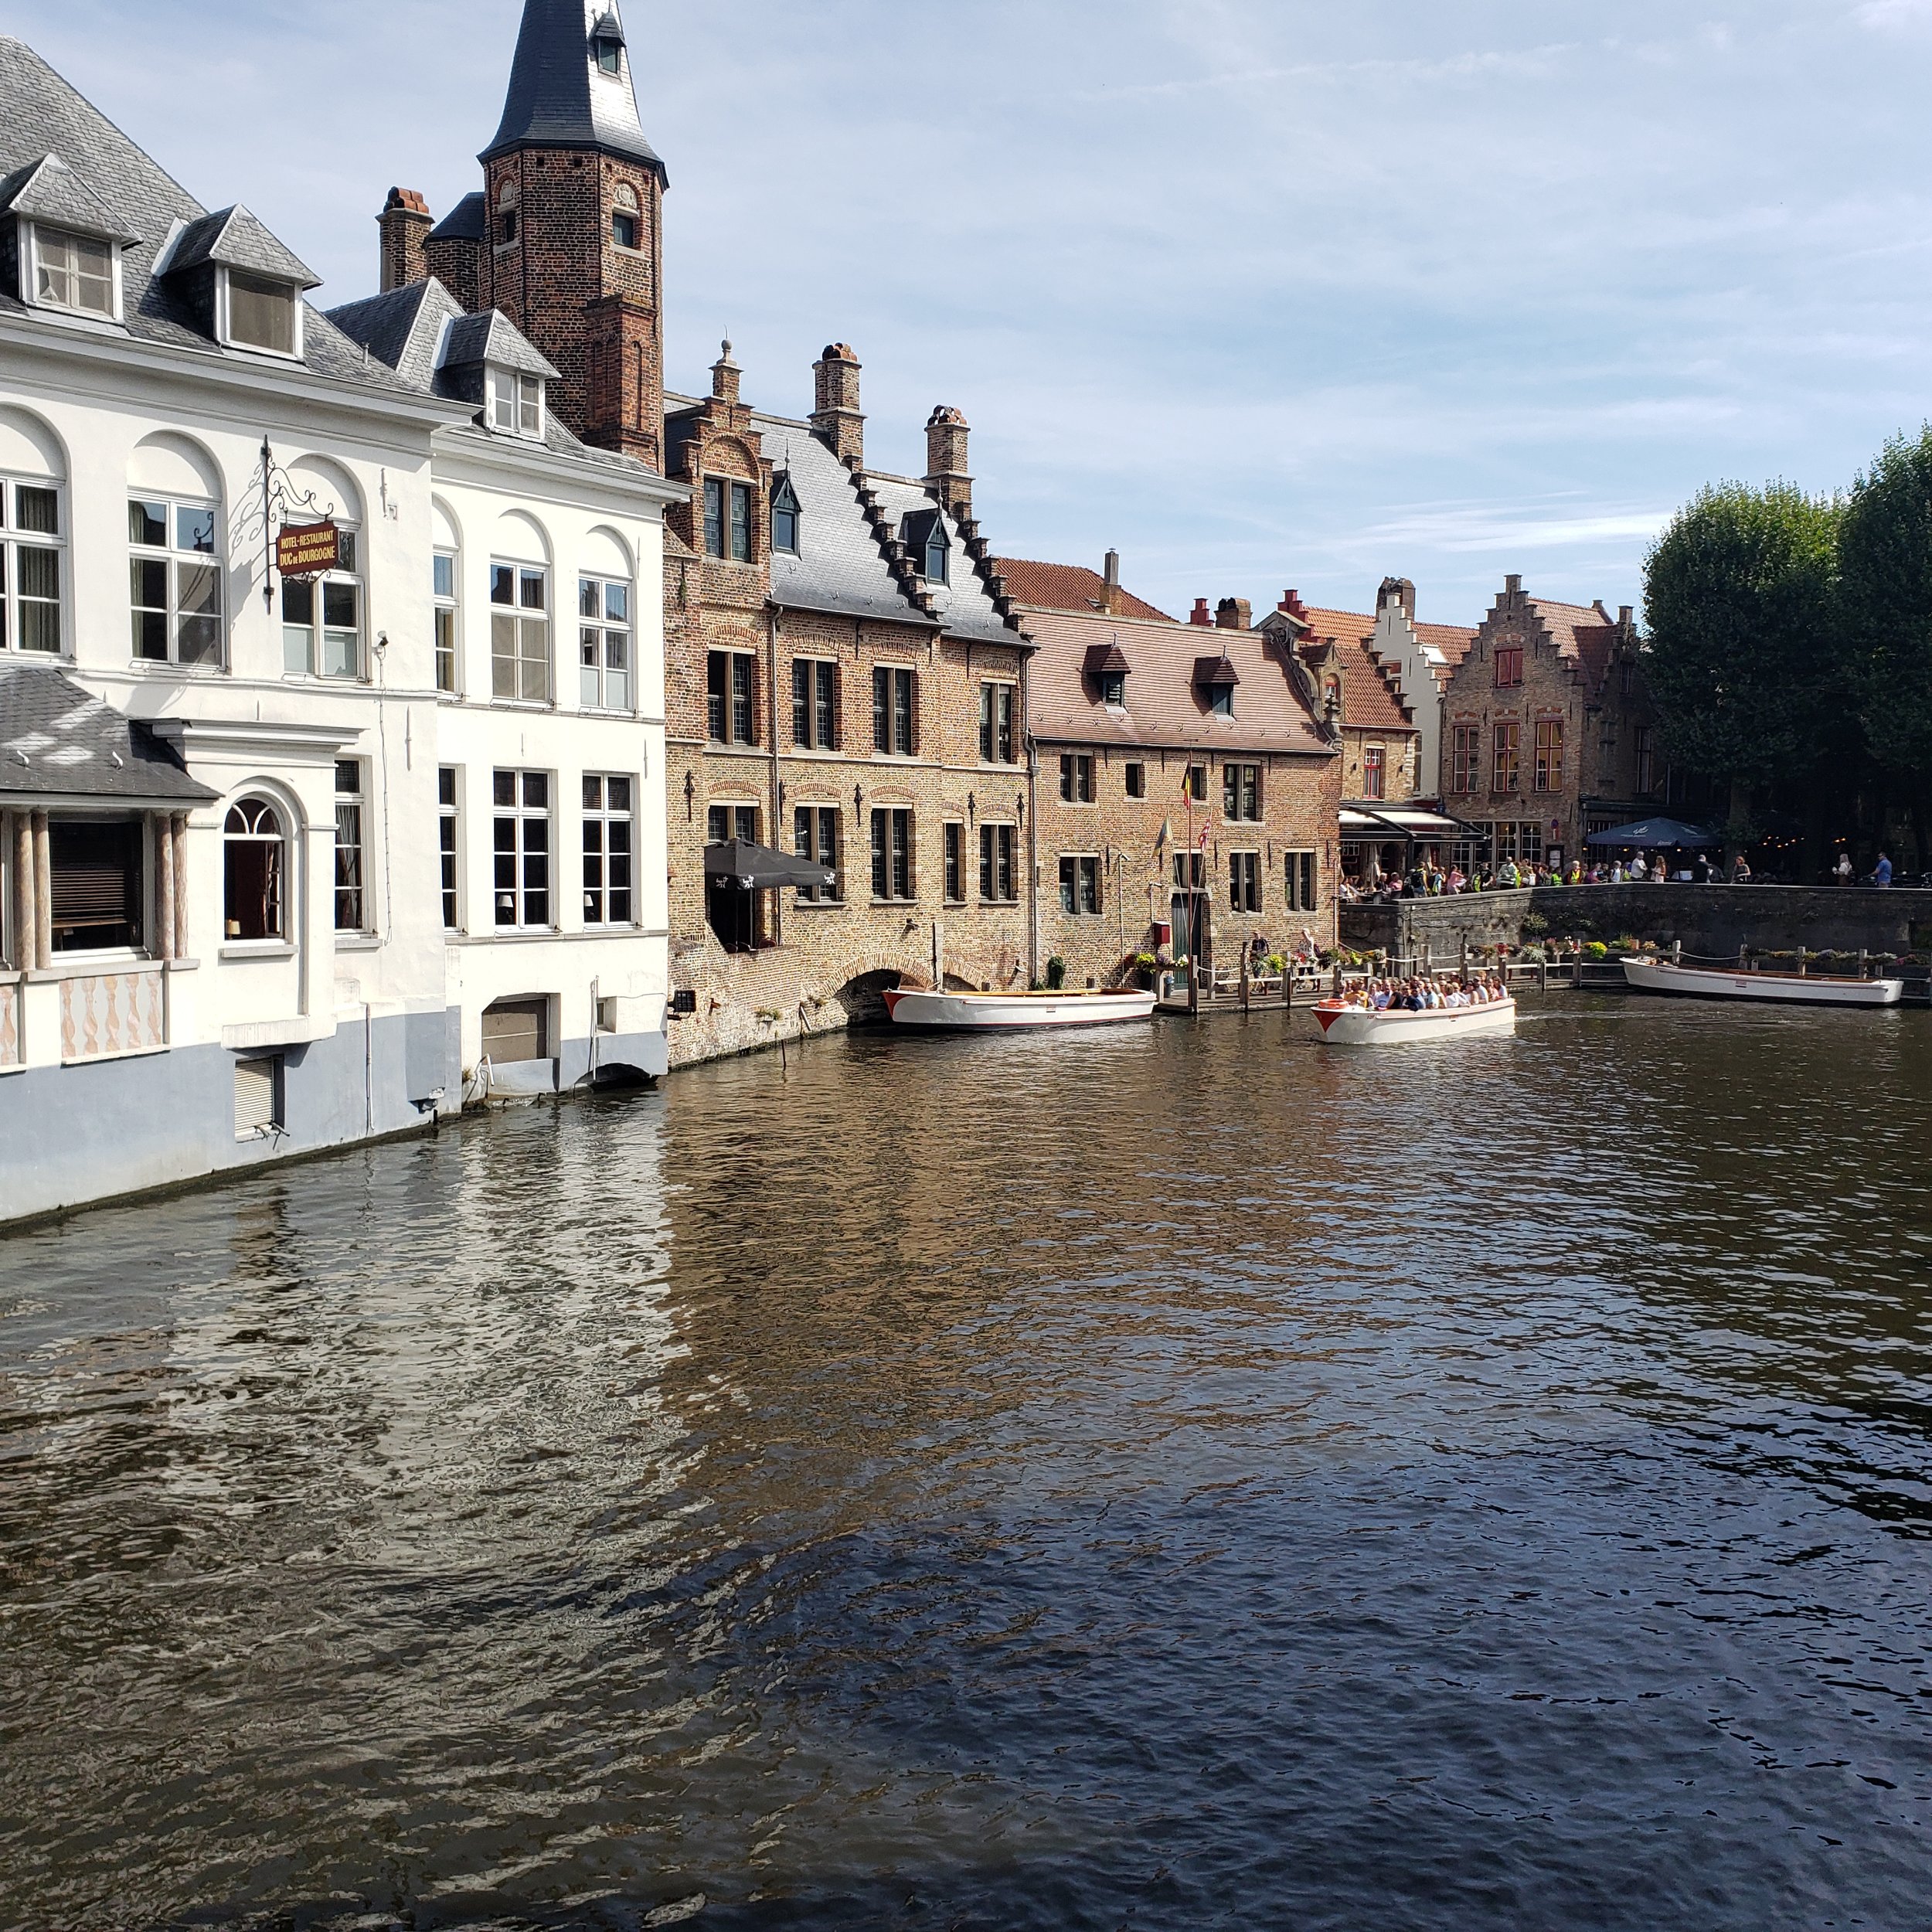  More photos of the beautiful Brugge canals 